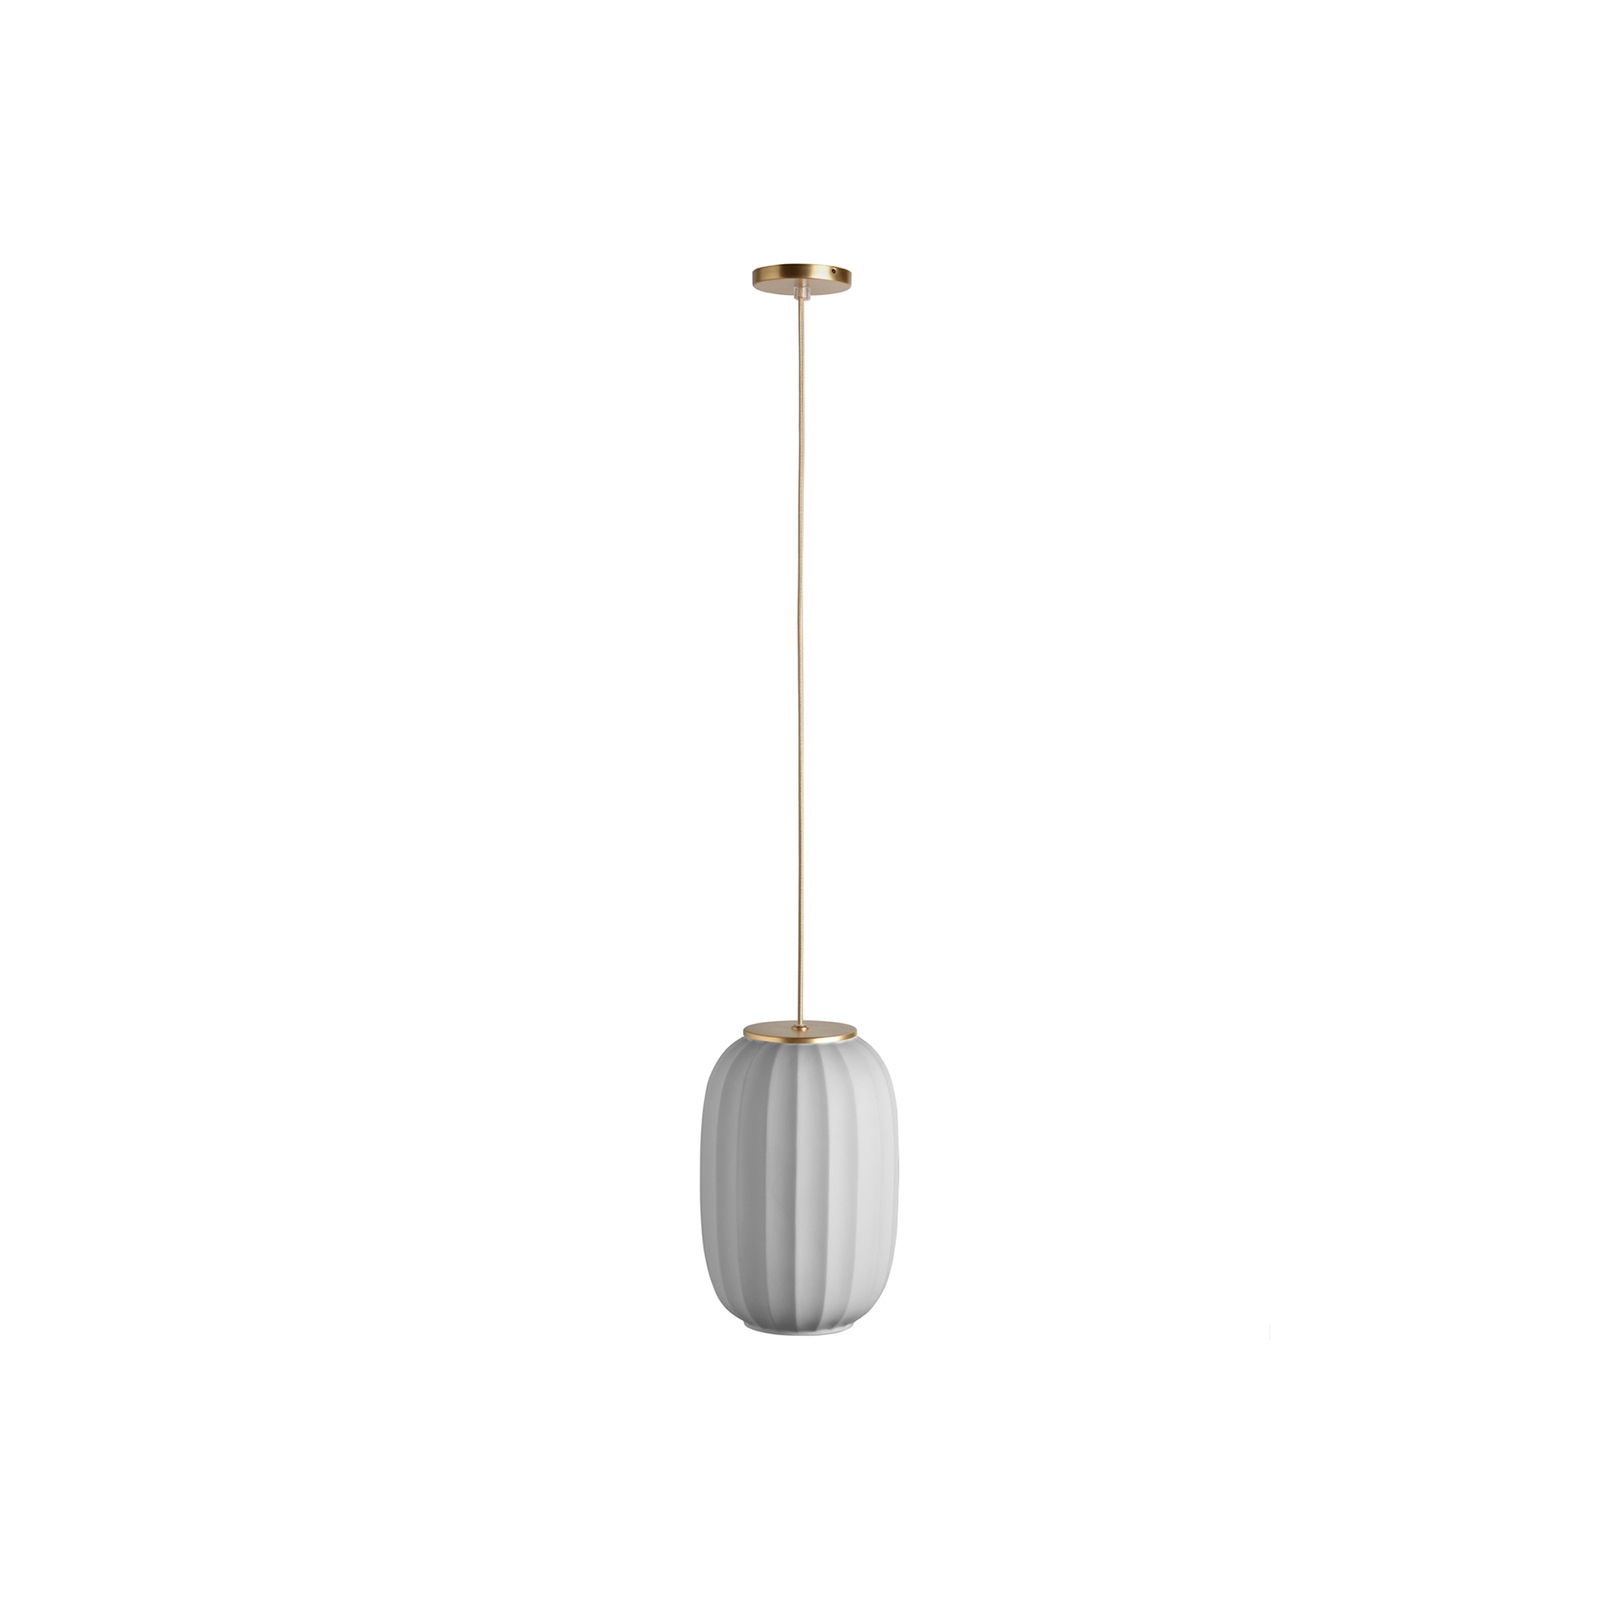 Mei pendant light, vertical oval lampshade, gold